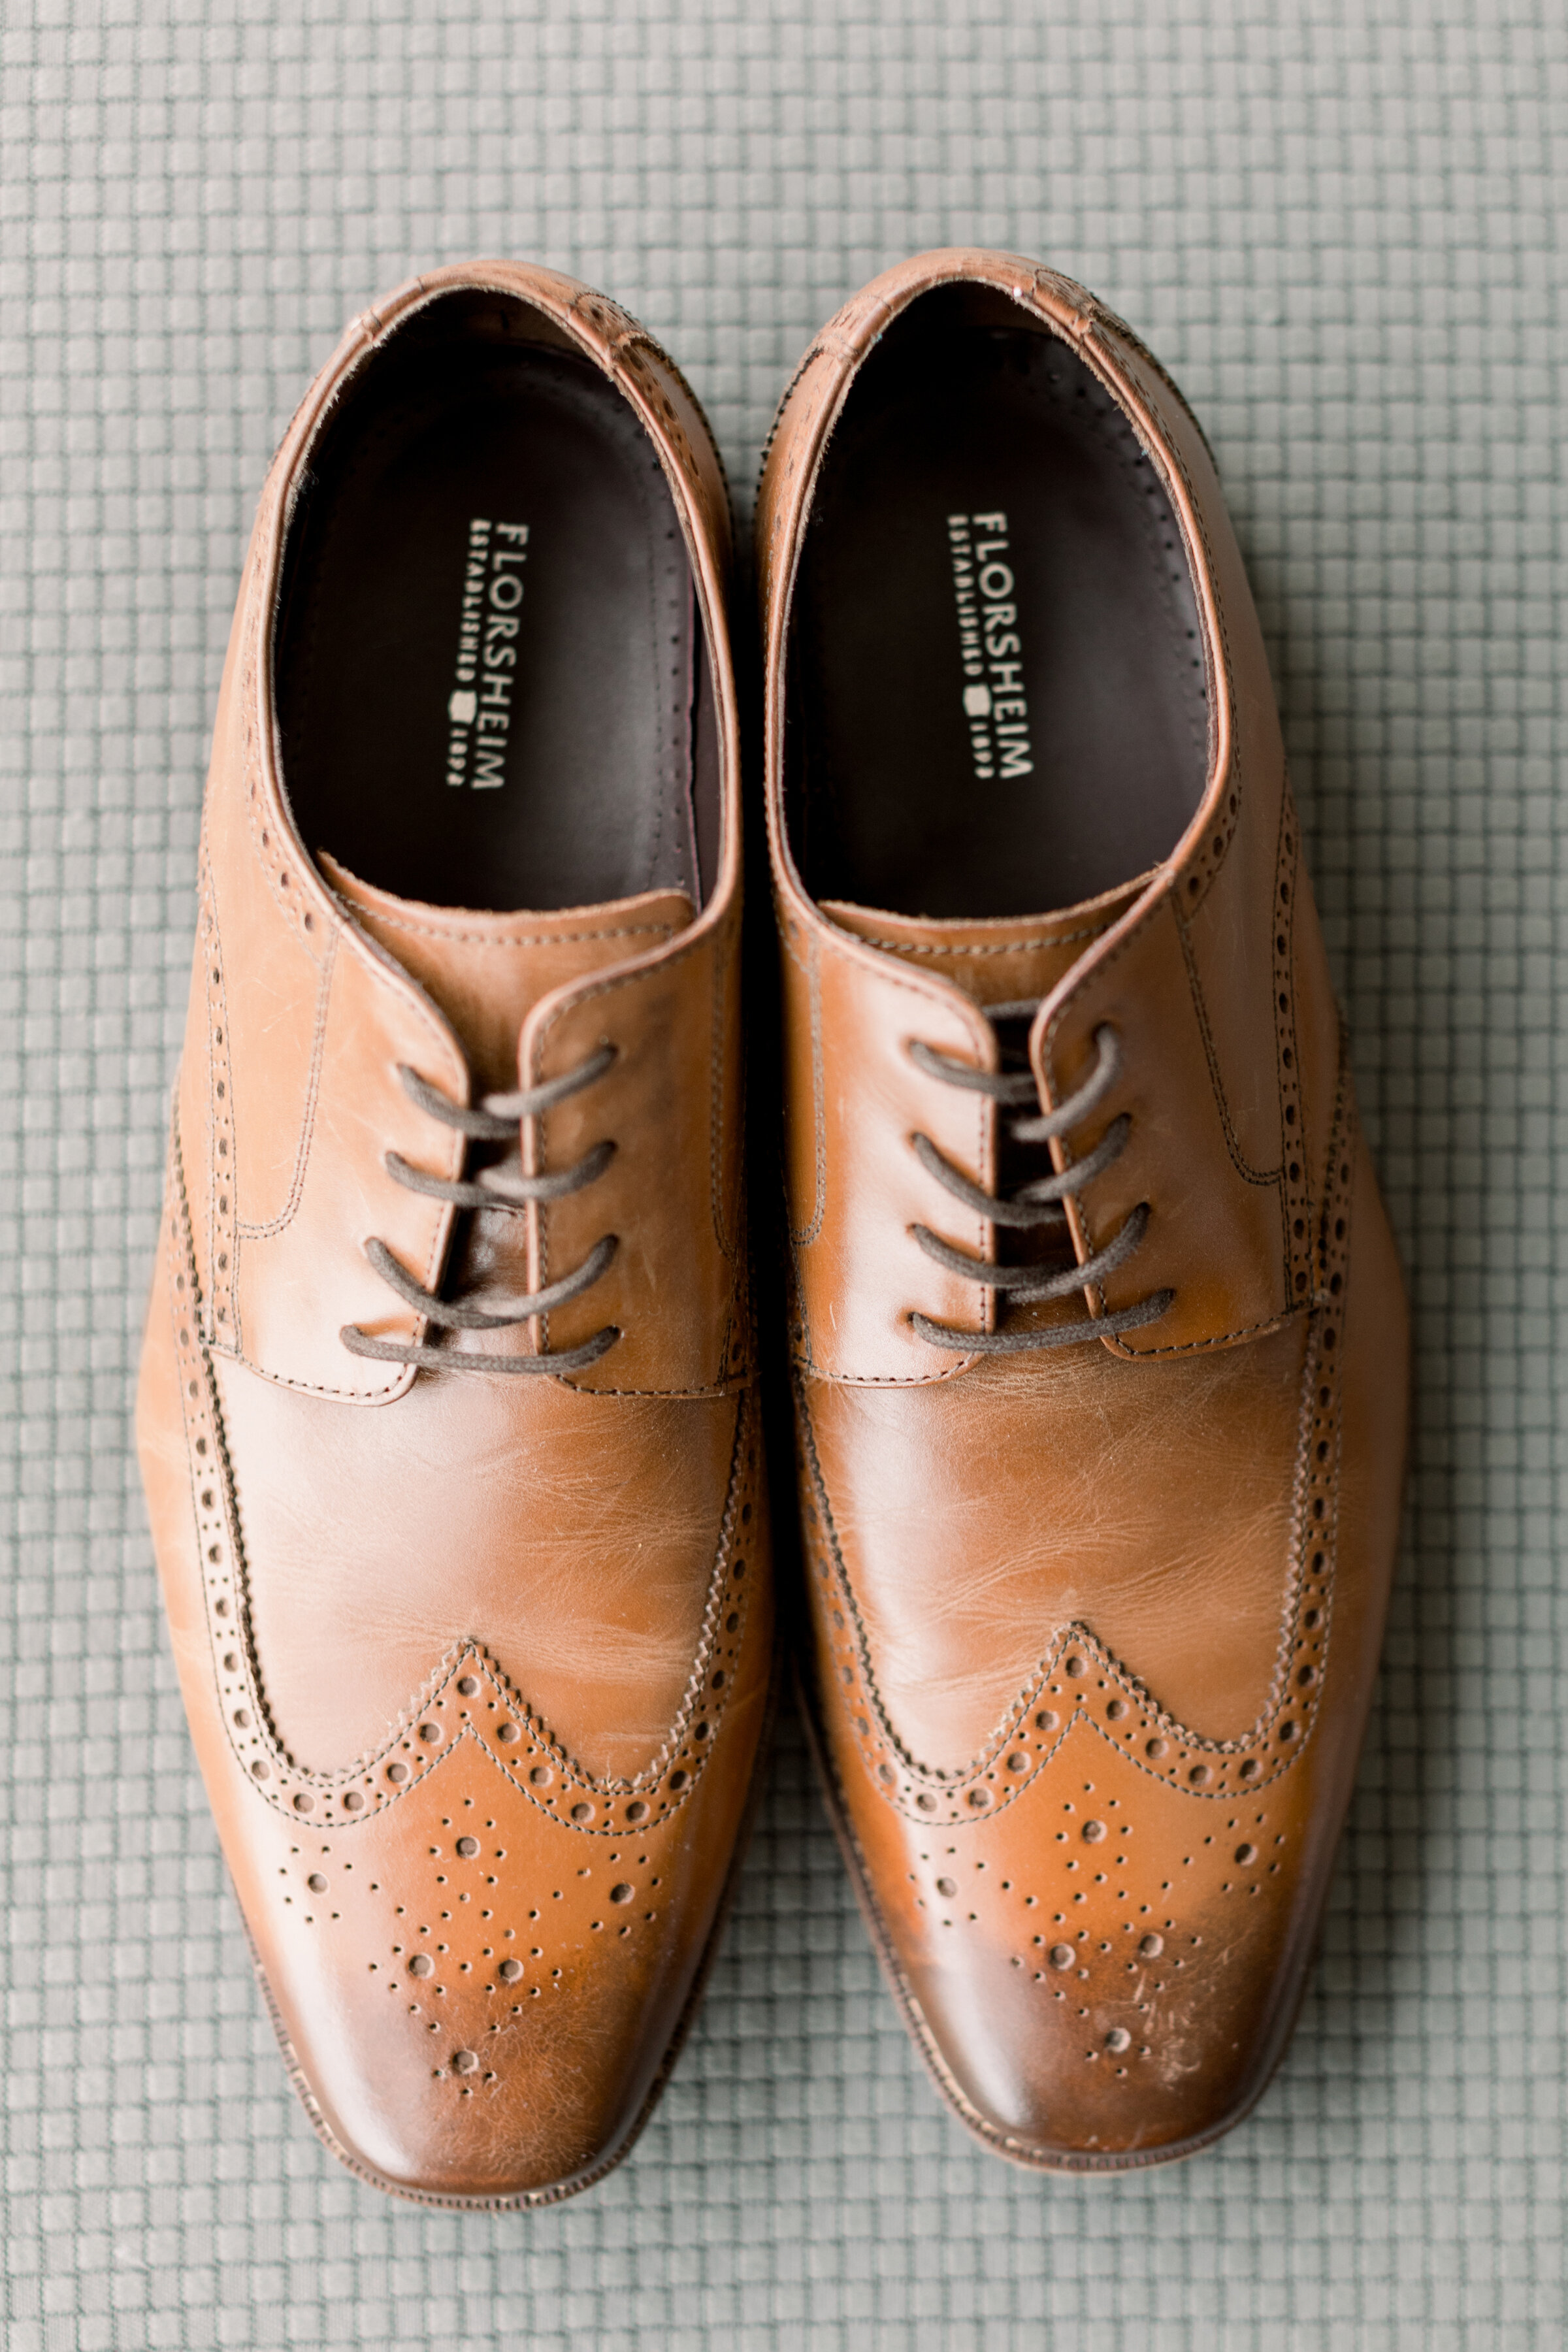  Detail shot of grooms classic cognac brown wedding shoes at The Herb Garden by Chelsea Mason Photography. ottawa on photography how to dress our groom outfit inspo for groom dressing your groom for your wedding brown shoes for groom best colors for 